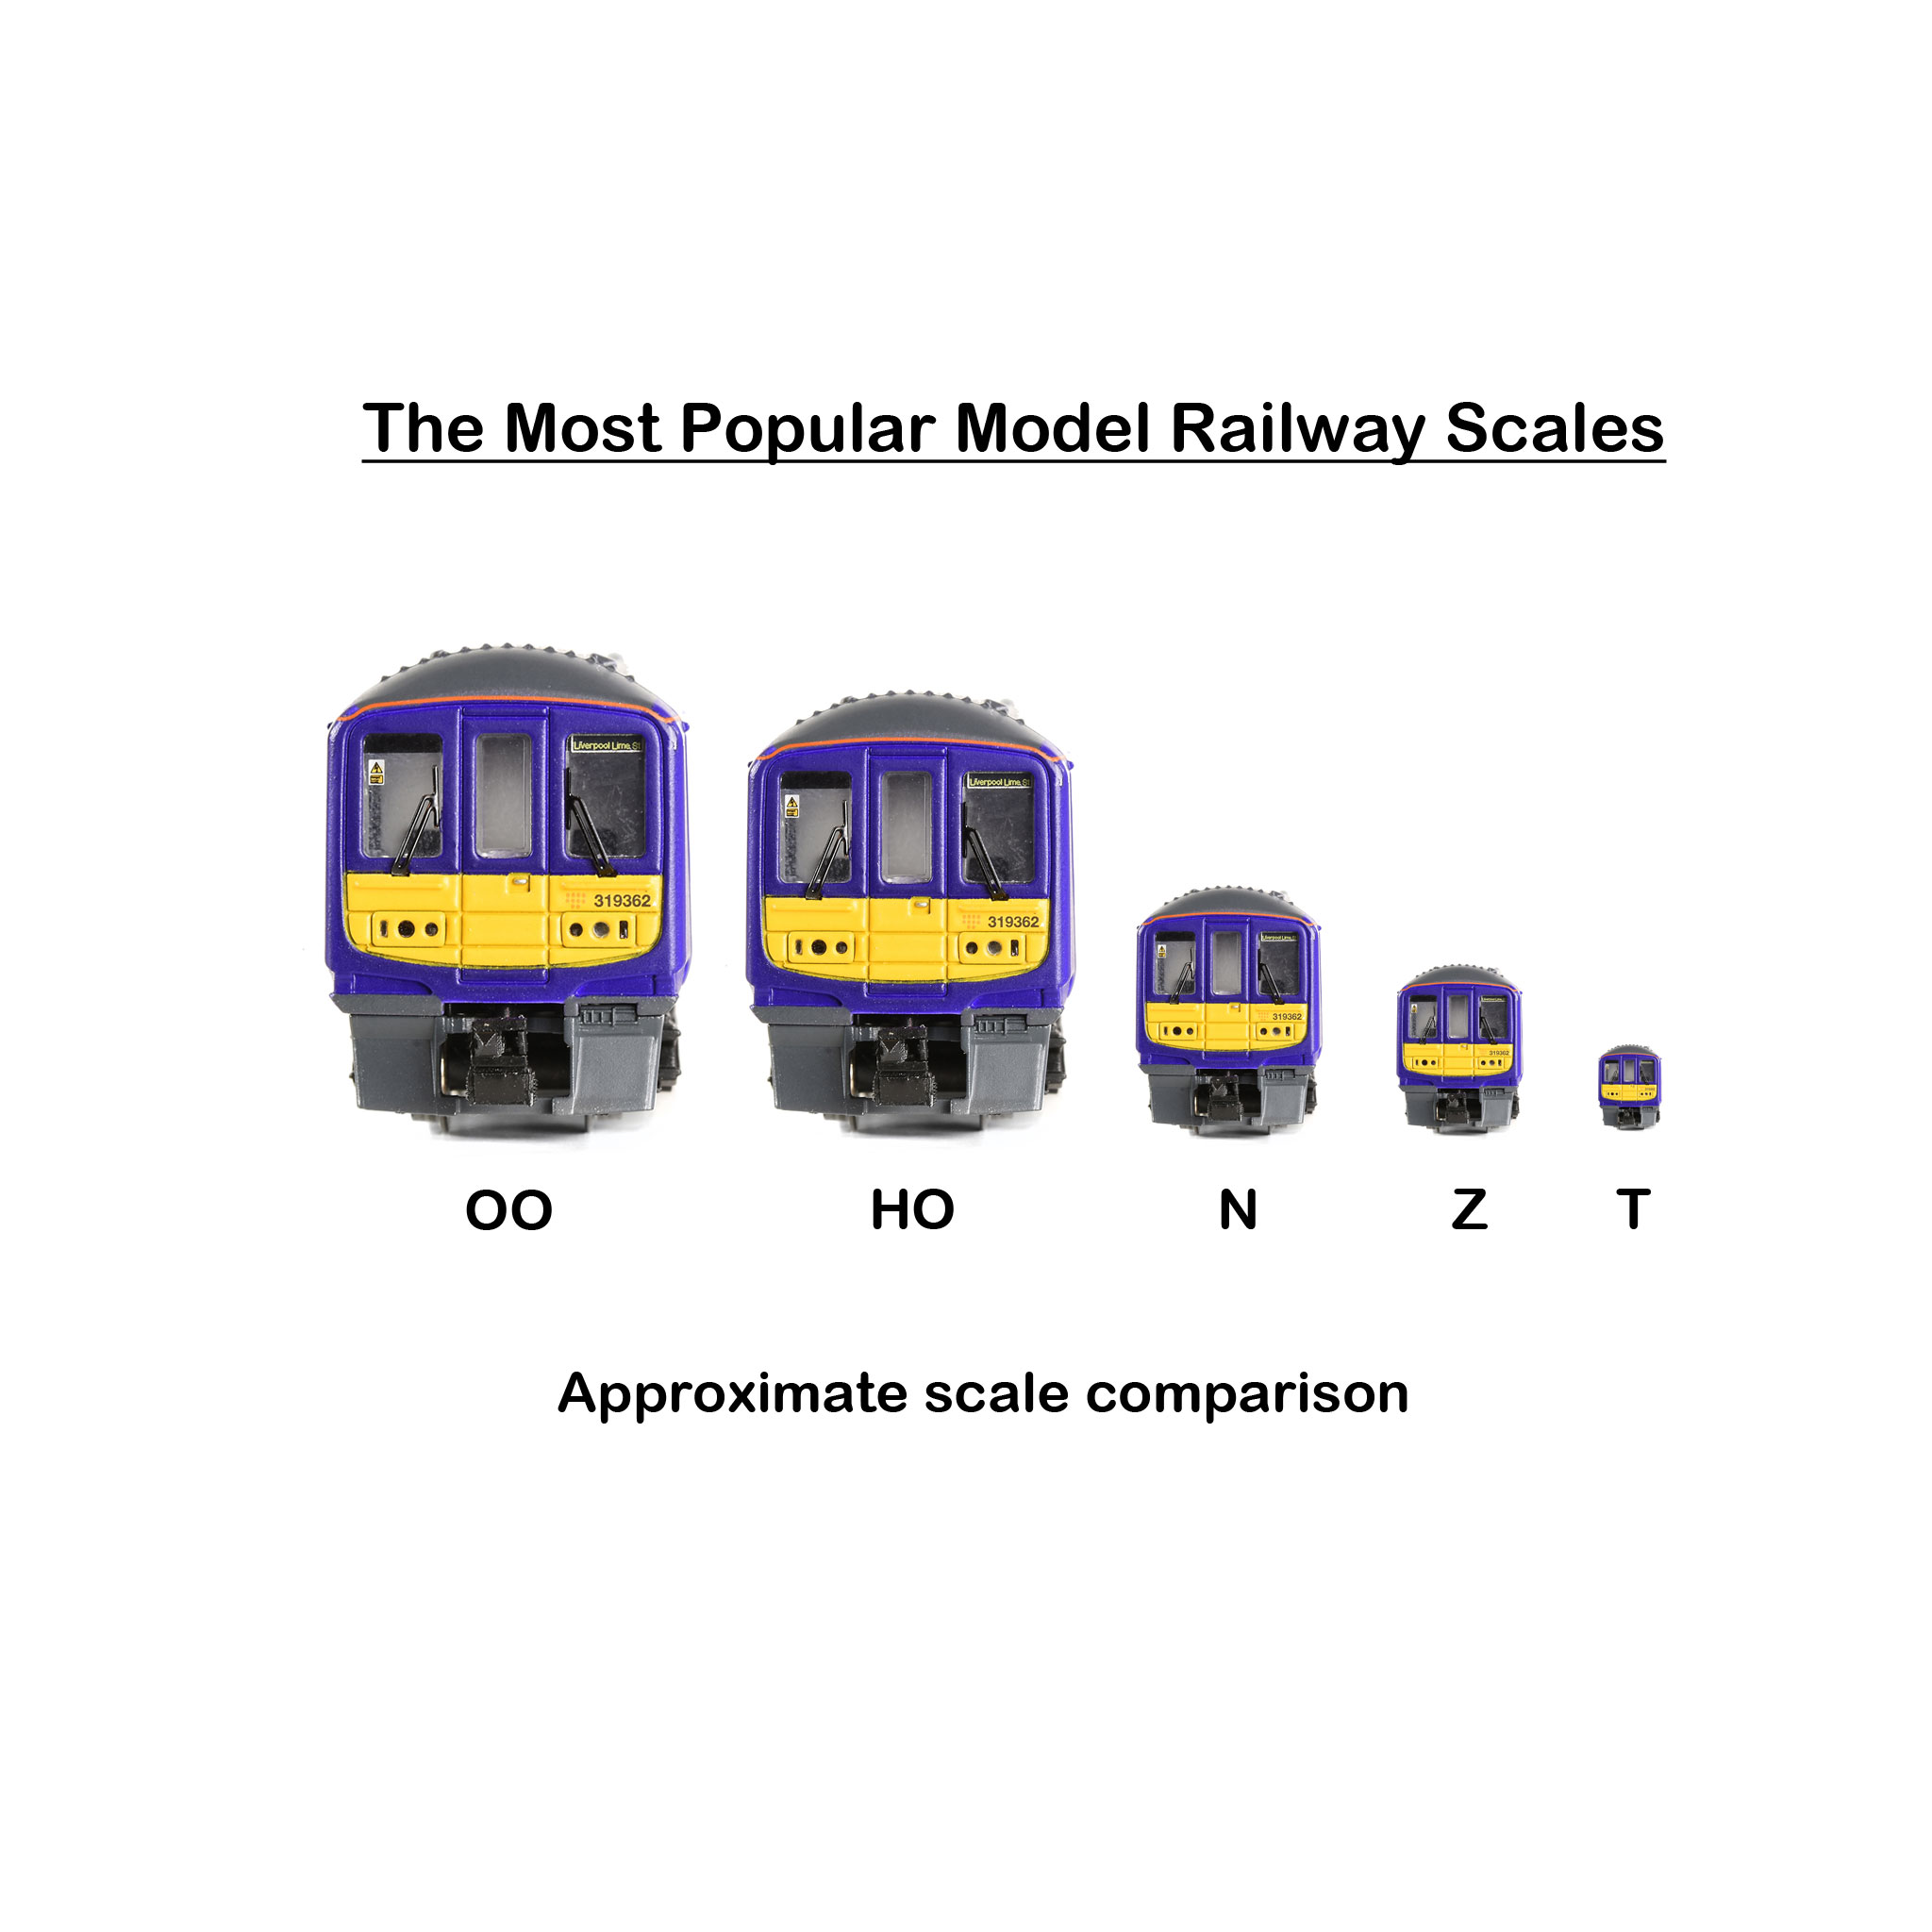 Model trains of different scales from OO to T.